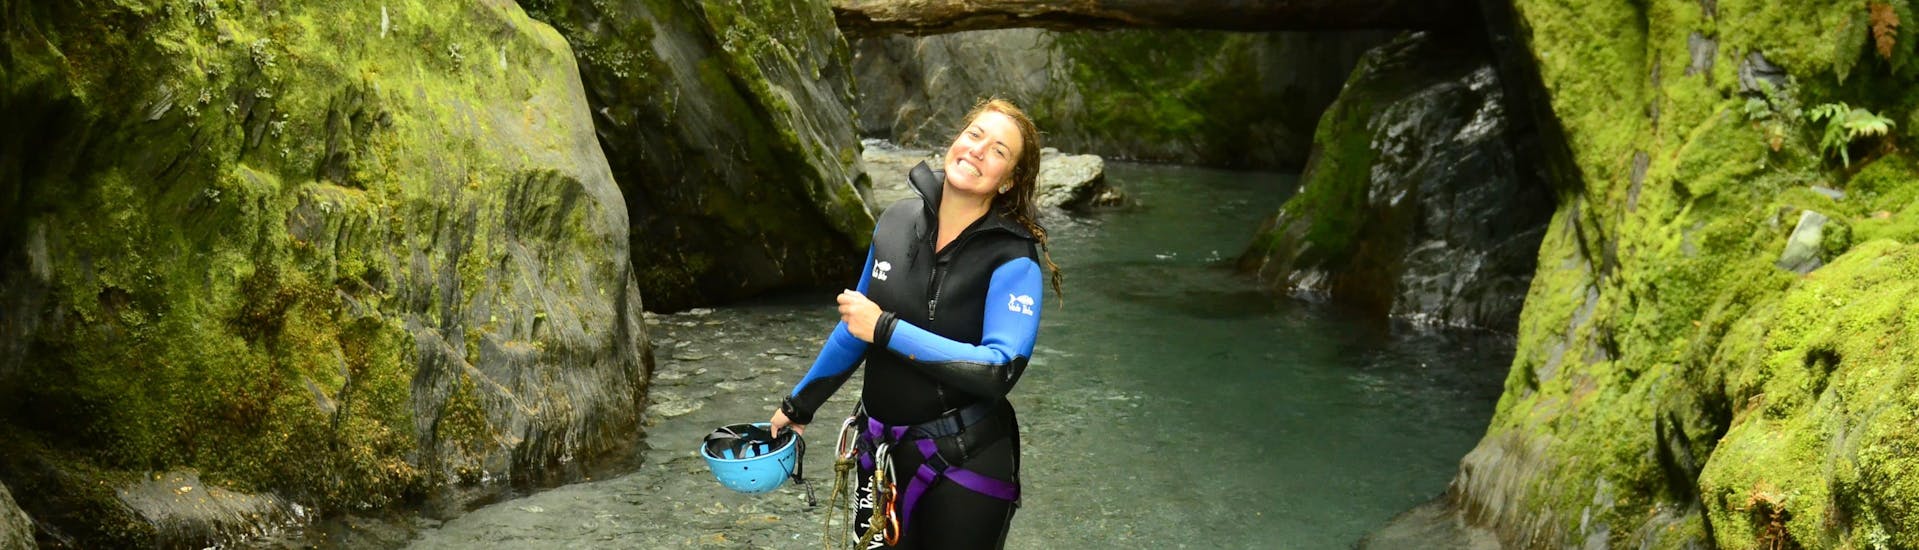 Woman smiling in the green canyon while Canyoning from Queenstown at Mount Aspiring - Full Day with Canyoning New Zealand.